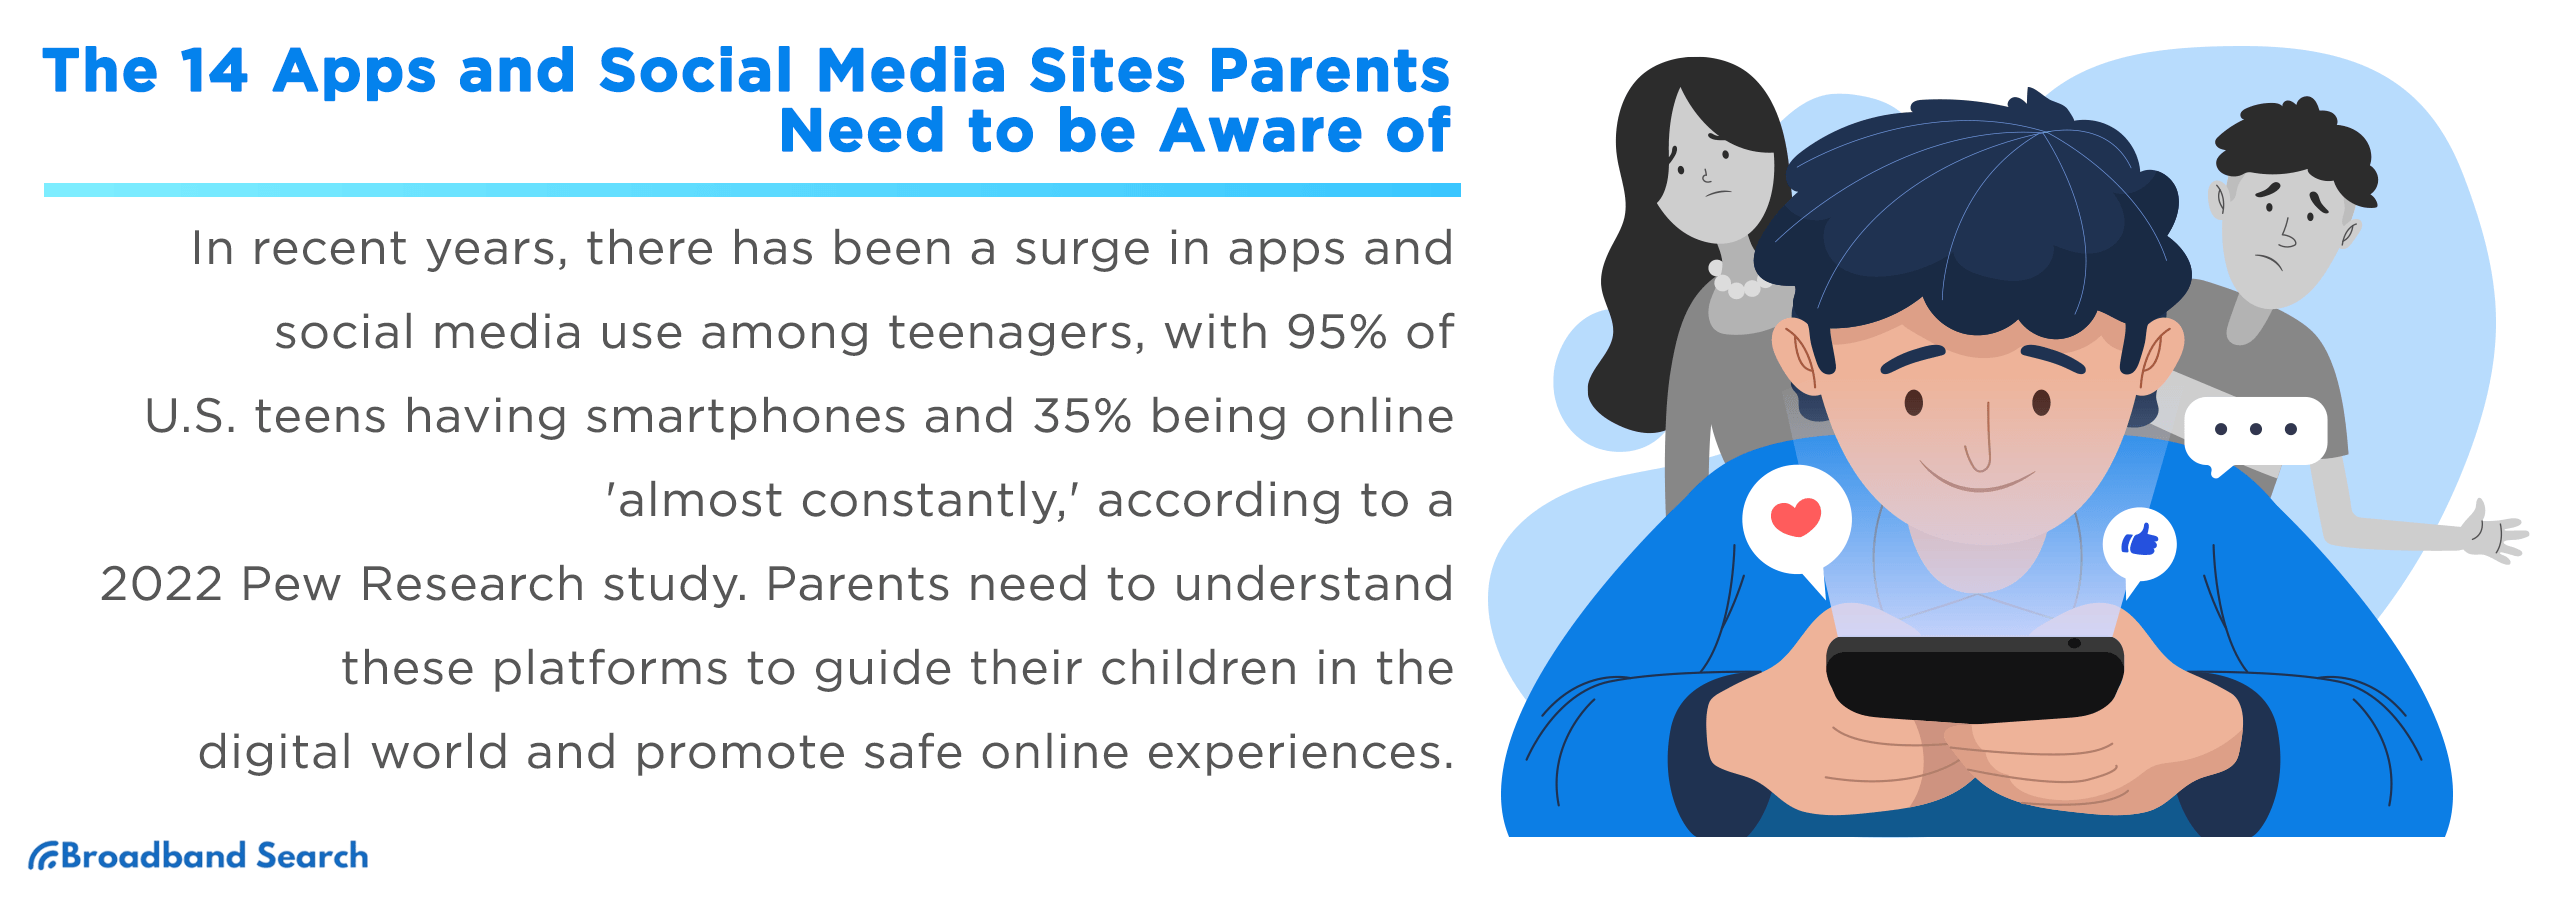 The 14 Apps and Social Media Sites Parents Need to be Aware Of